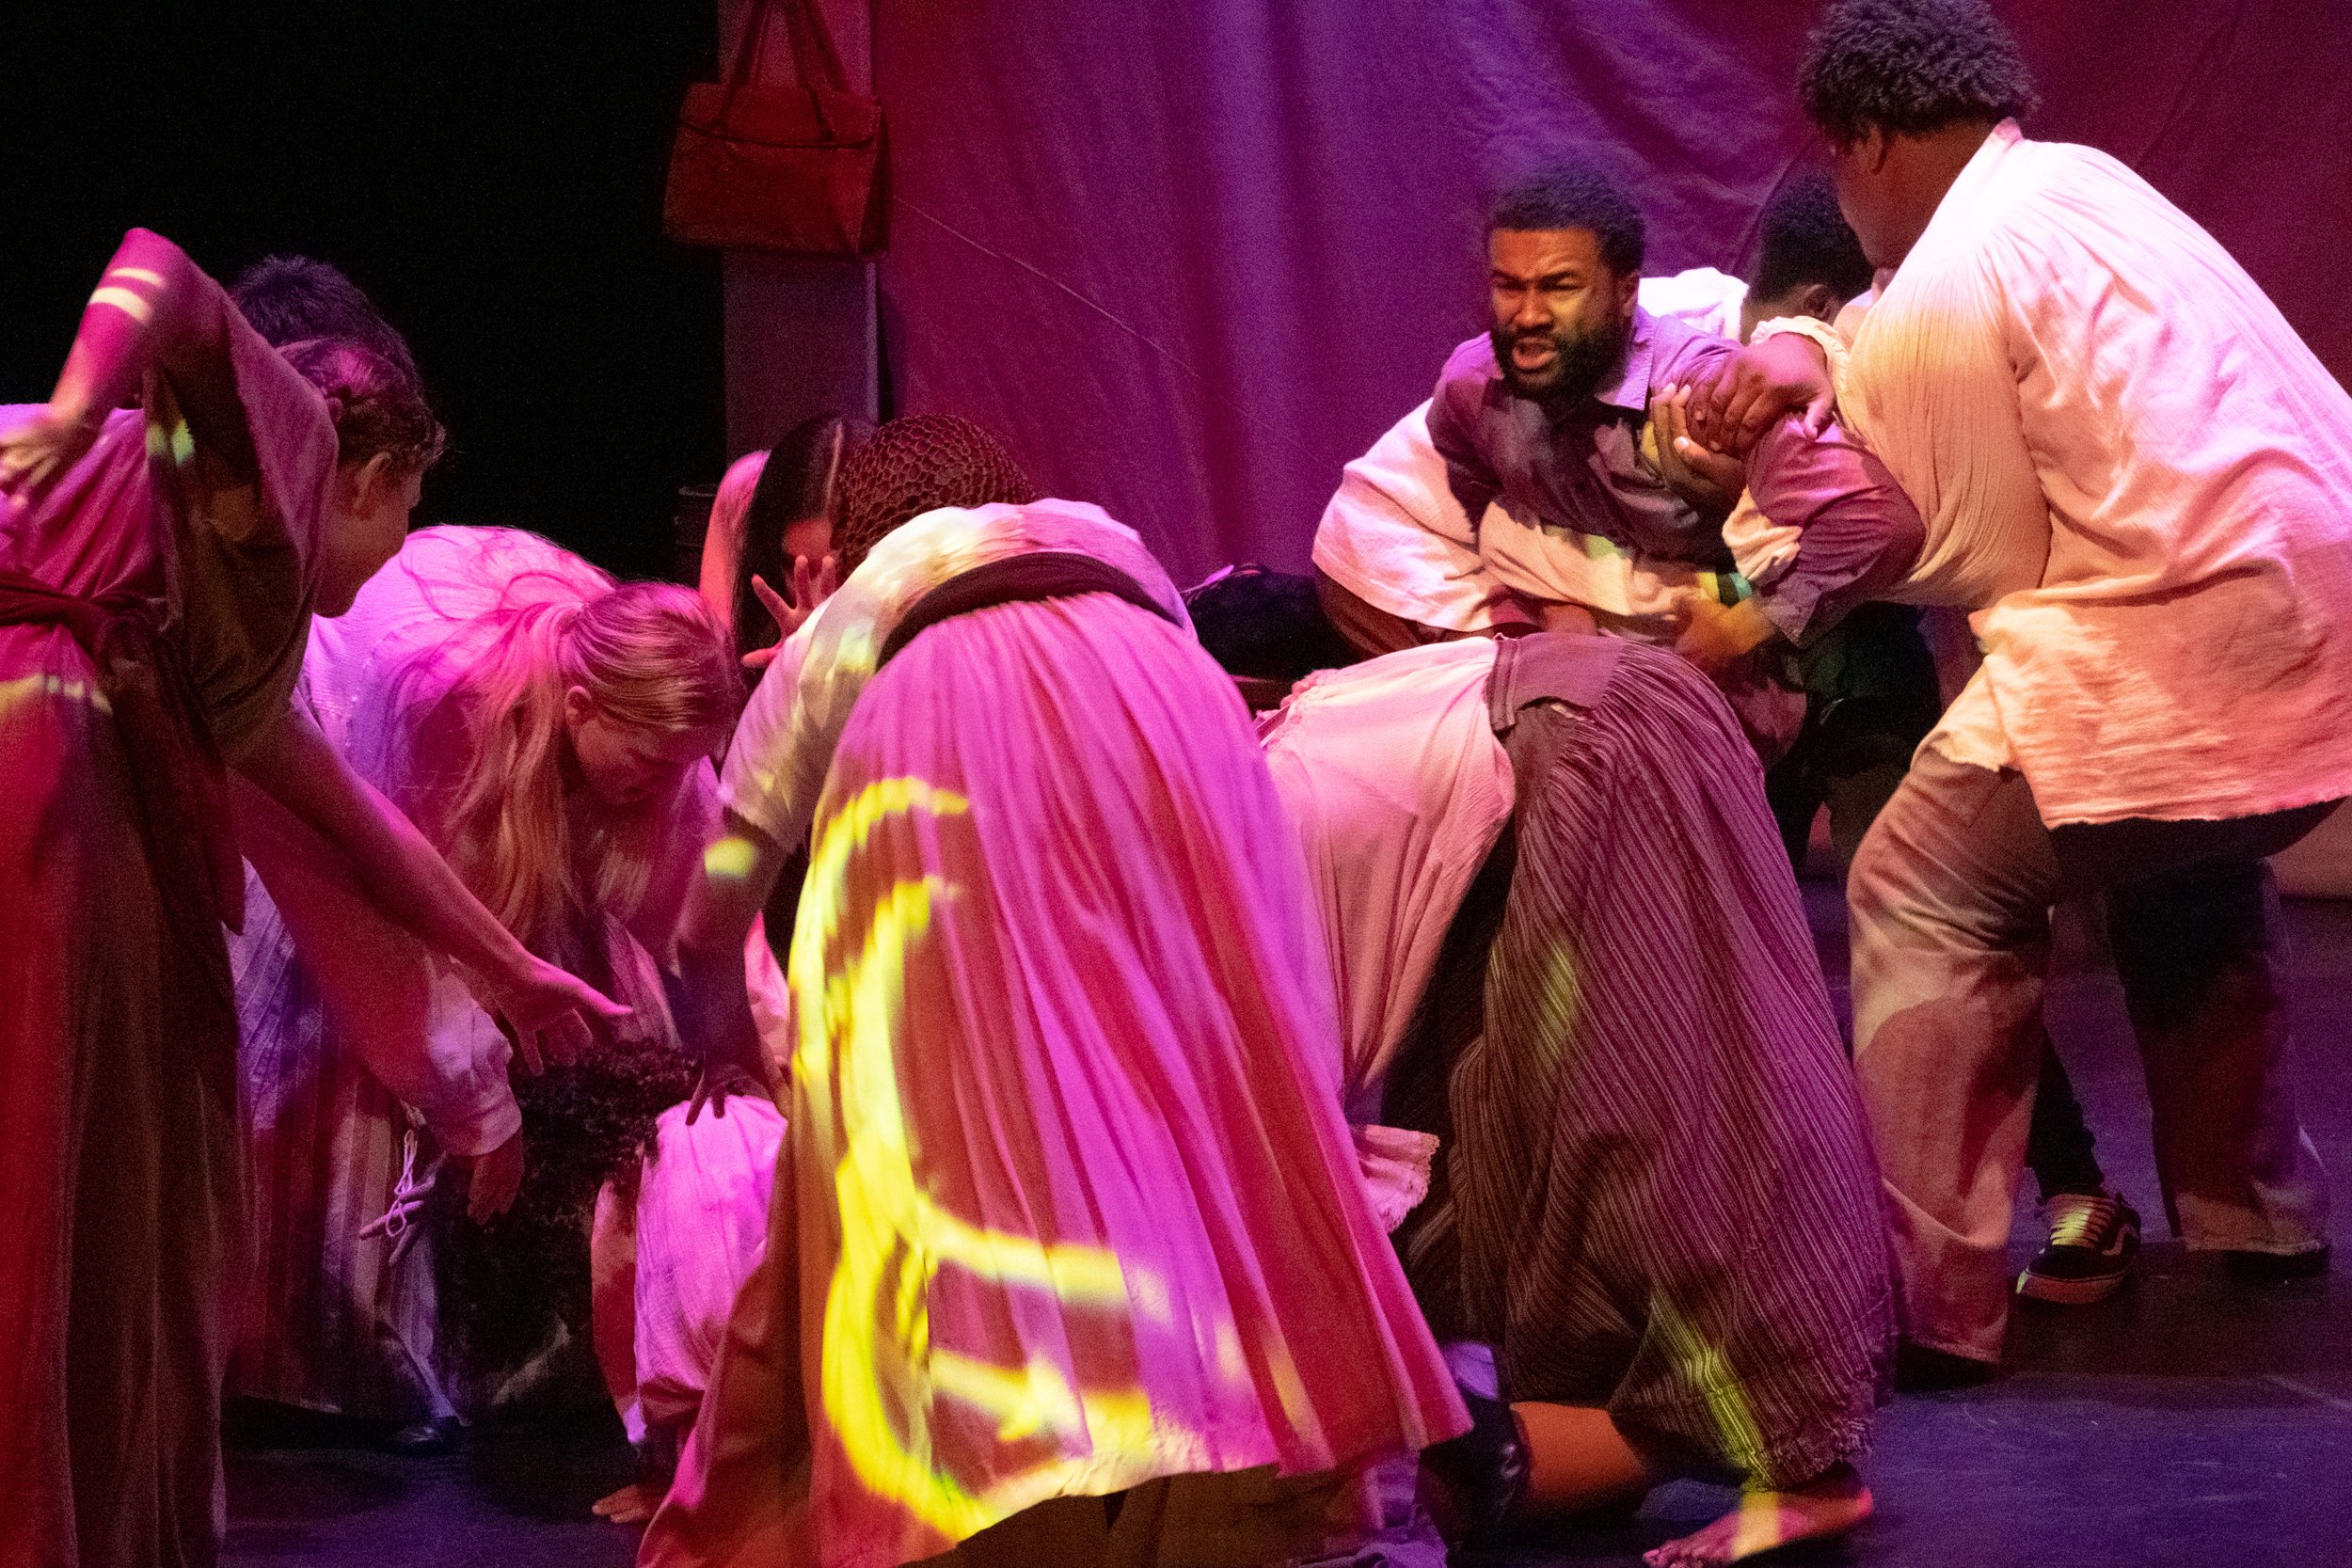  The cast performs a dance which becomes Grady's nightmare during the play "By The River Rivanna," performed on Tuesday Oct. 17th, 2023 in Santa Monica, Calif. at the Santa Monica Colllege Studio Stage. Earl Williams can be seen on the right being he